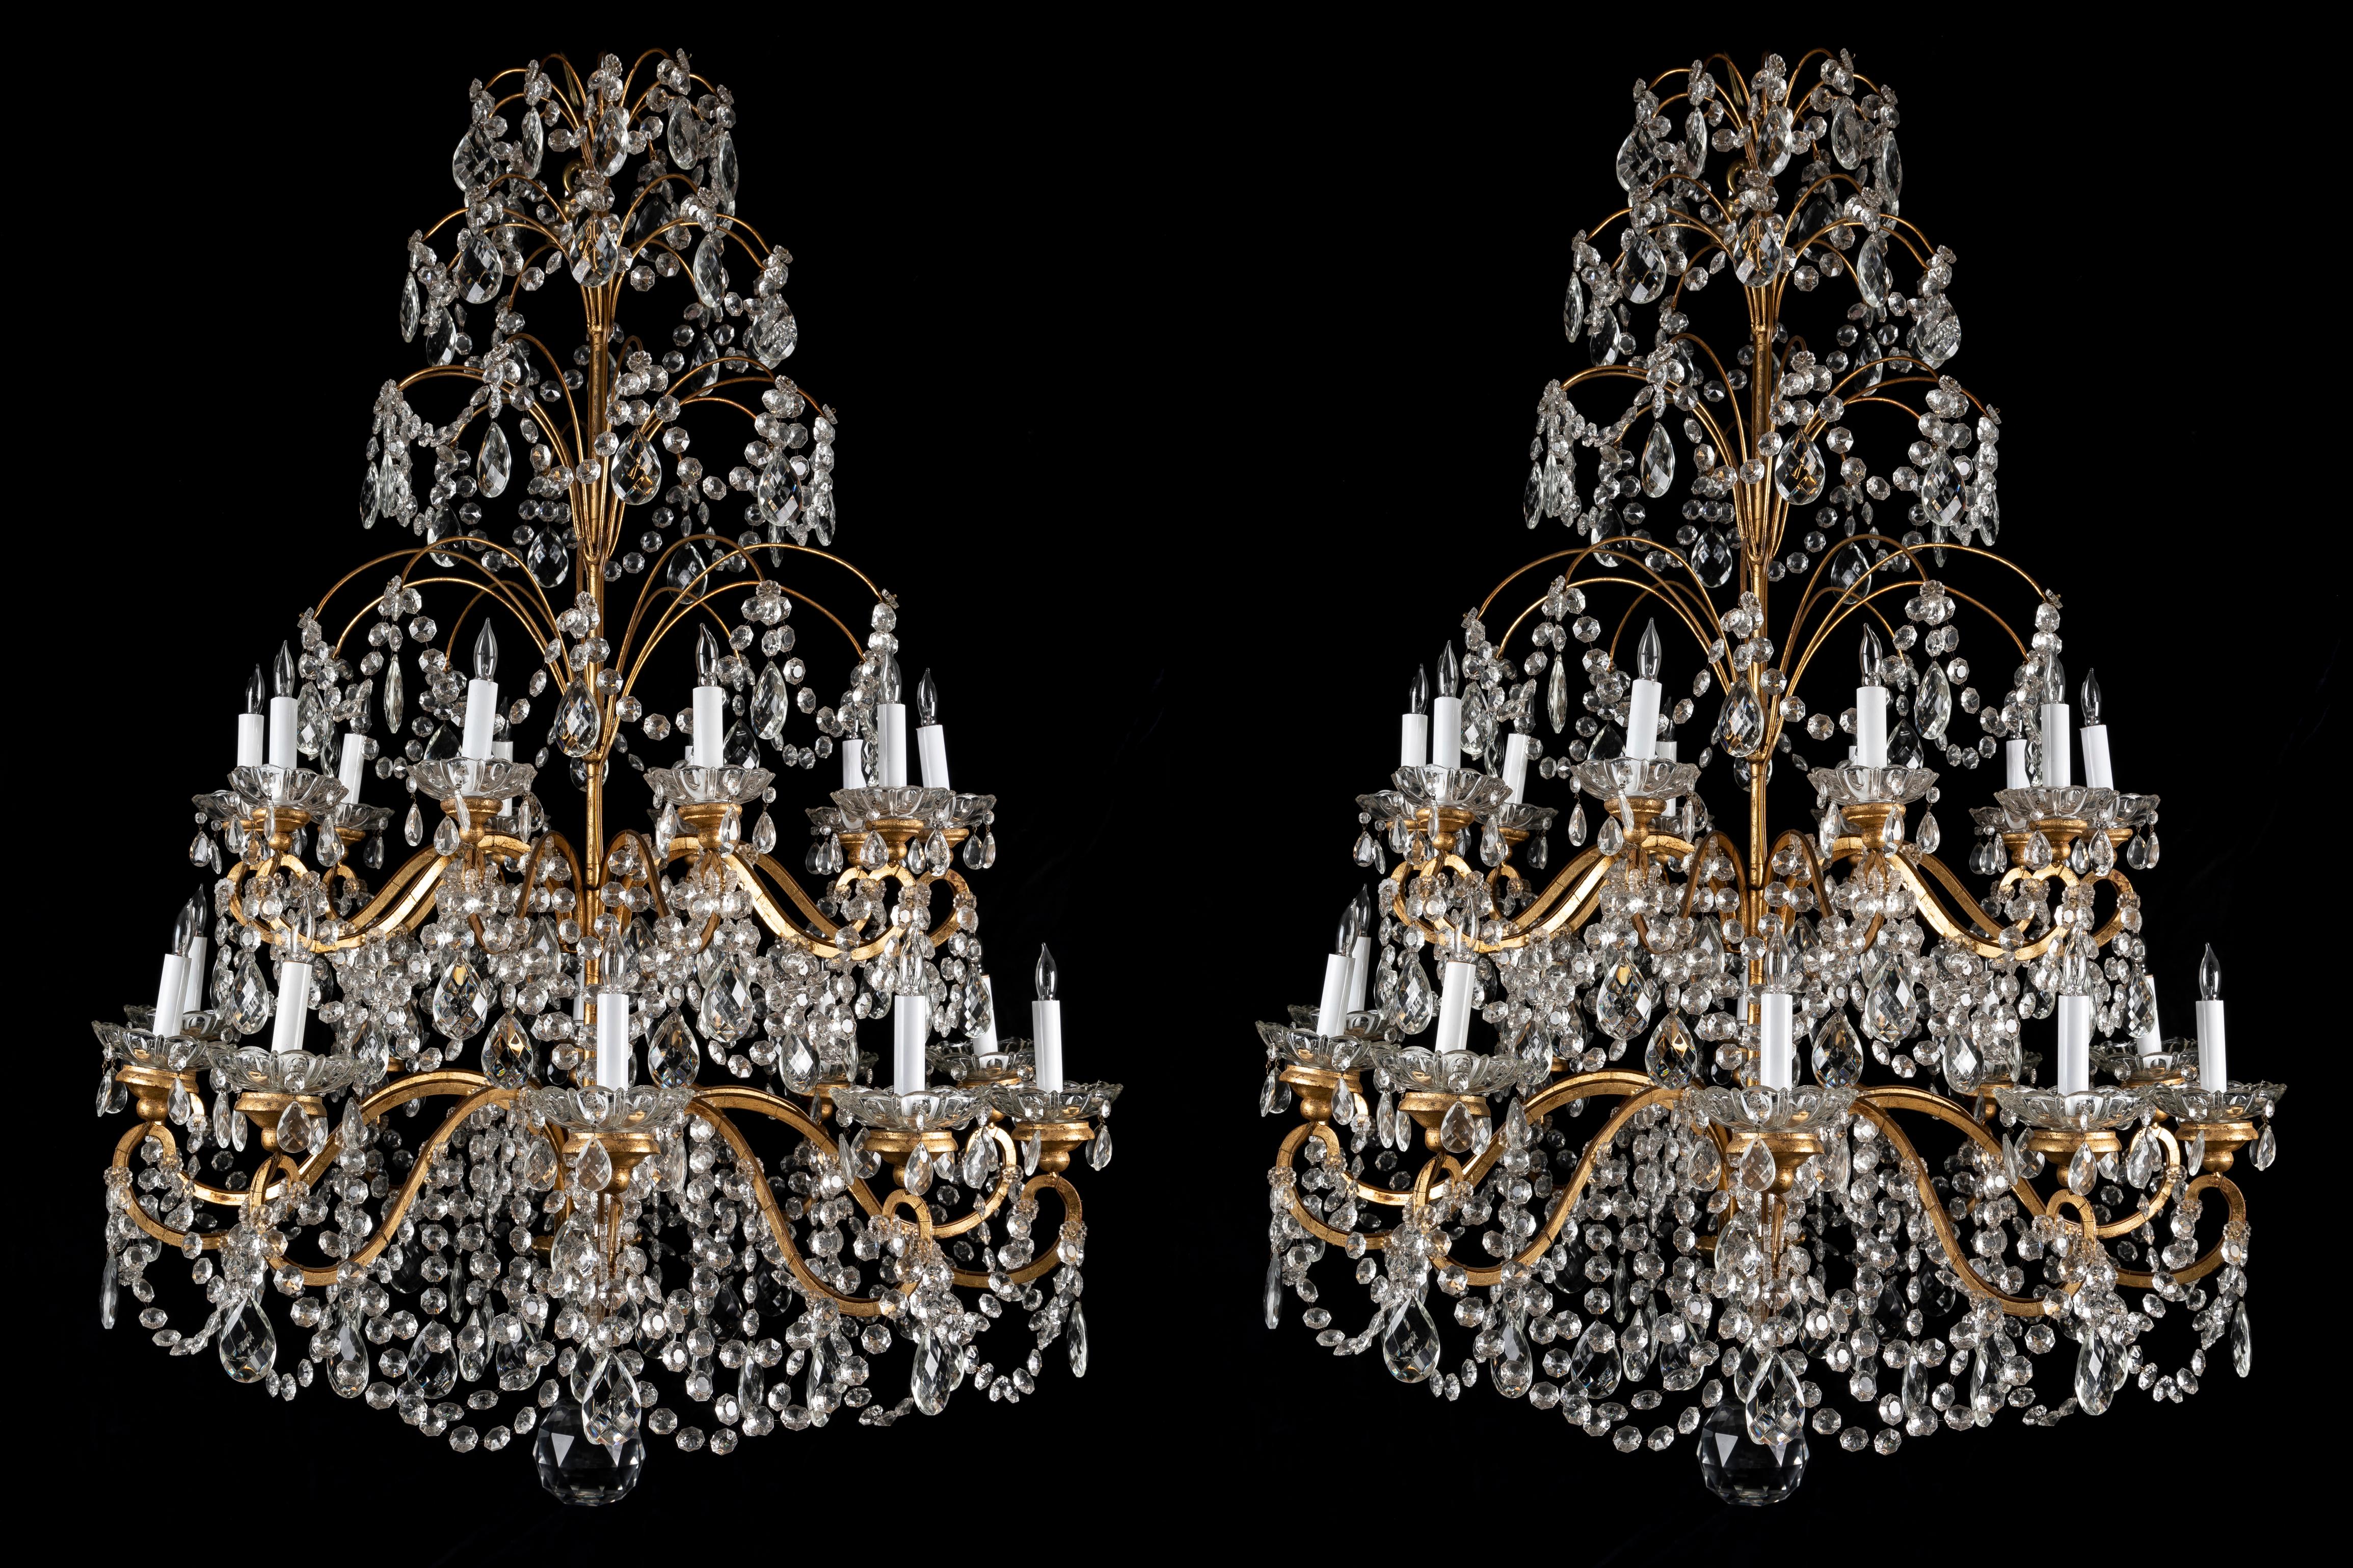 A gorgeous pair of very large French Louis XVI style 20 light multi tier gilt bronze , wood and crystal chandeliers of superb workmanship. Each twenty light chandelier is embellished with scrolled arms and adorned with beautiful circular glass